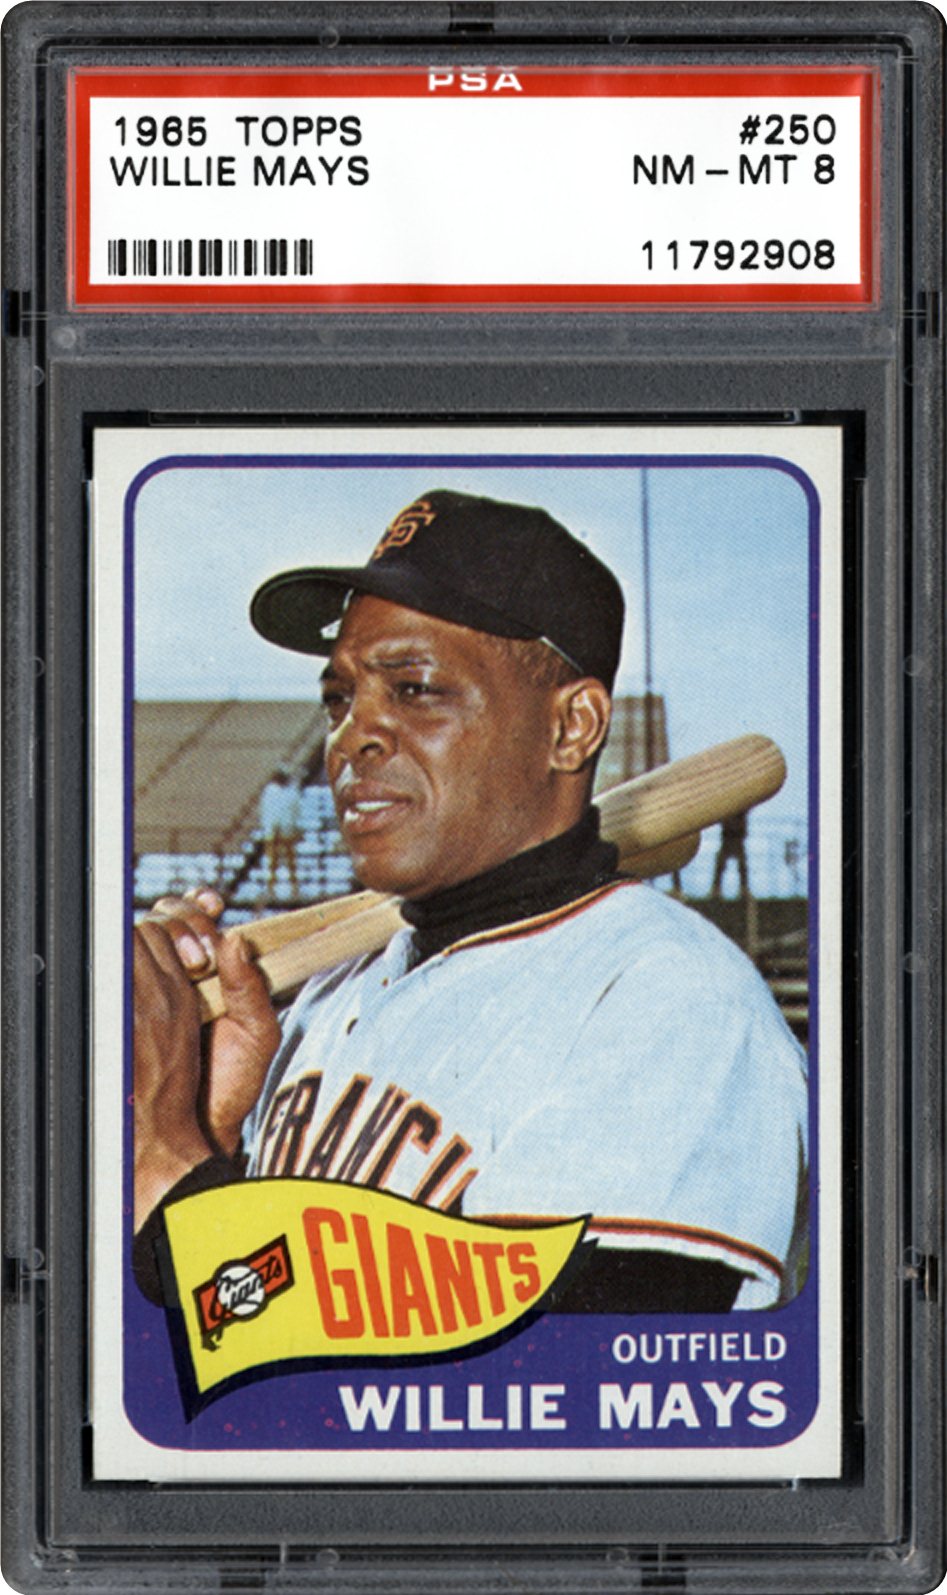 1965 Topps Willie Mays PSA CardFacts™